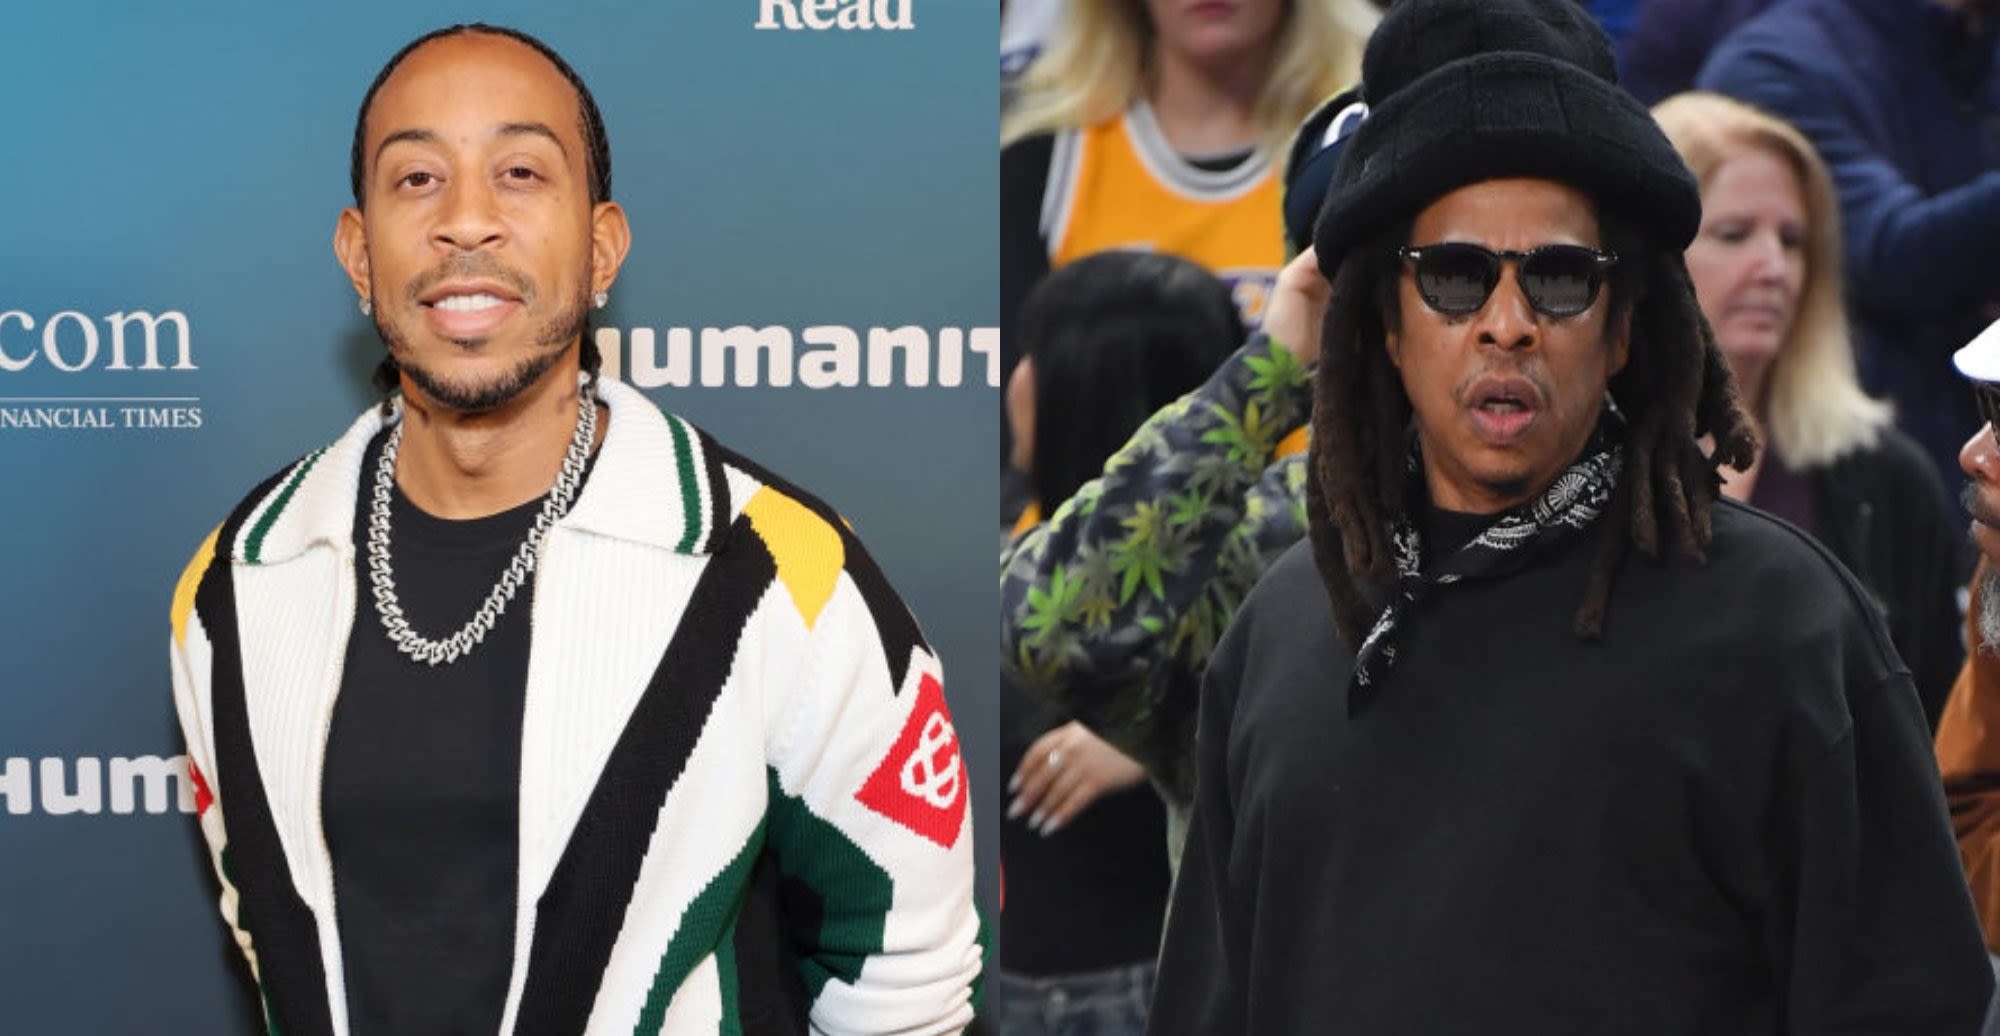 Ludacris Alleges He Would Beat Jay-Z In A Verse Writing Competition-- 'I Would Win On That One'